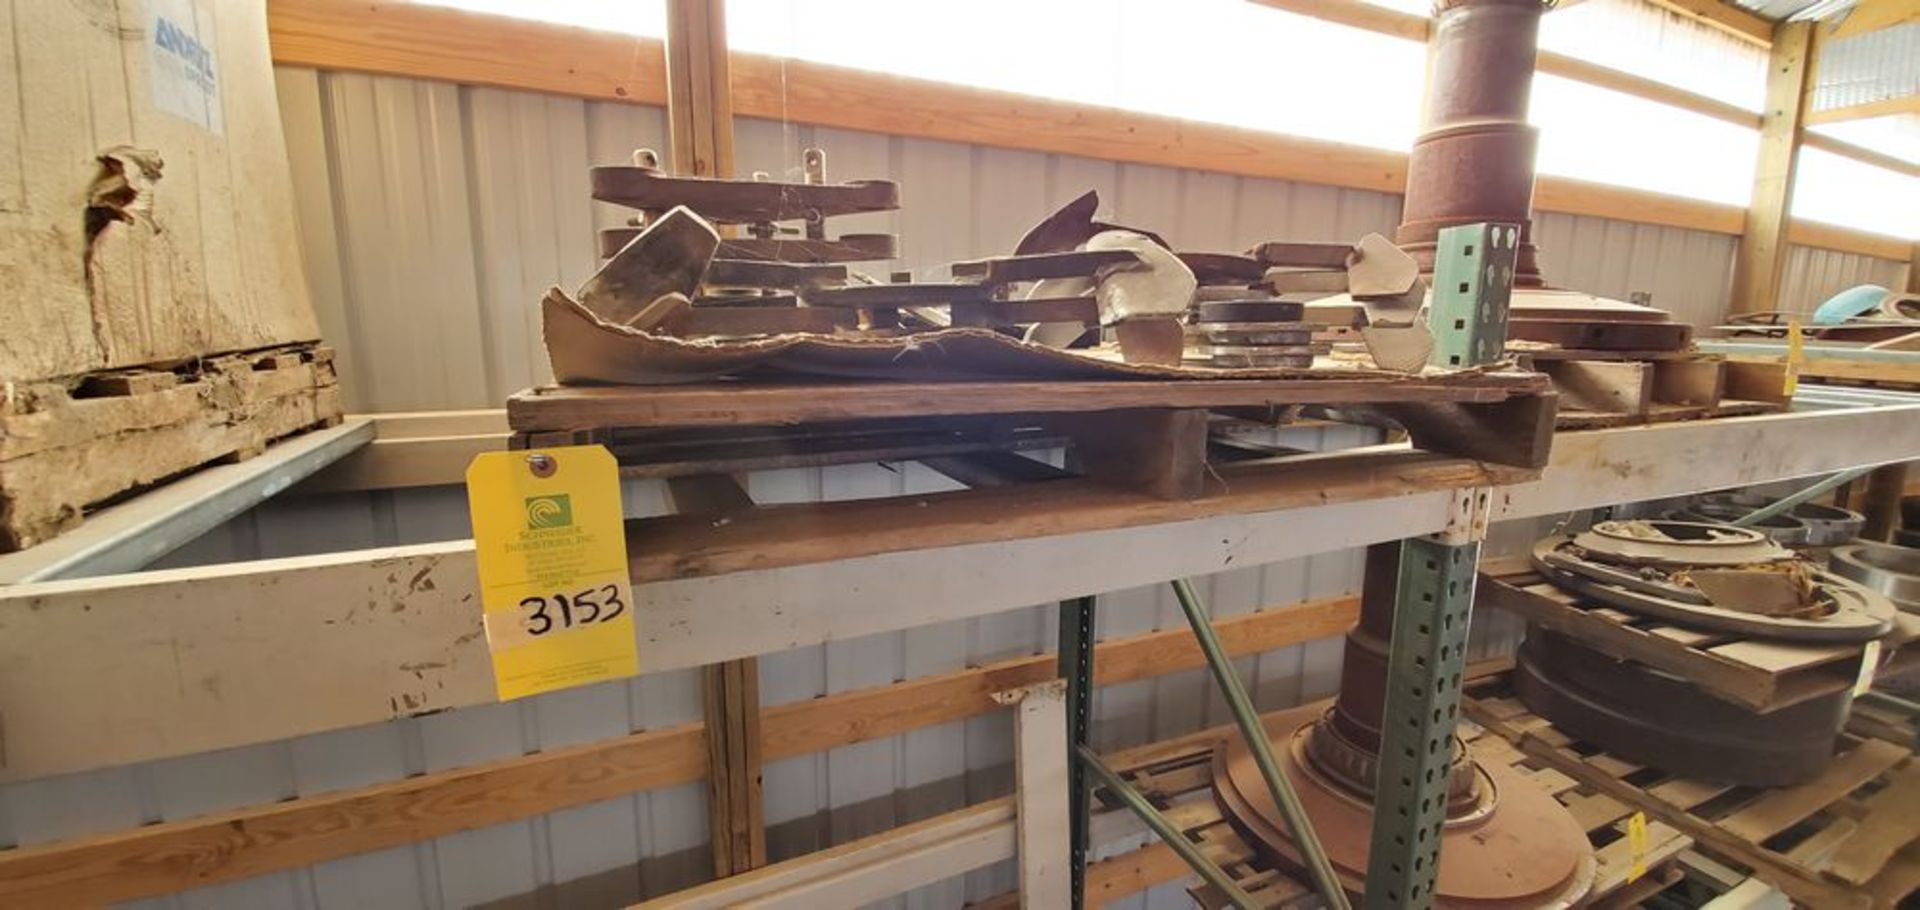 Located in Canon City, CO -- Lot: 5 Sprout front plates for sprout 26 with 2 front deflectors, and 3